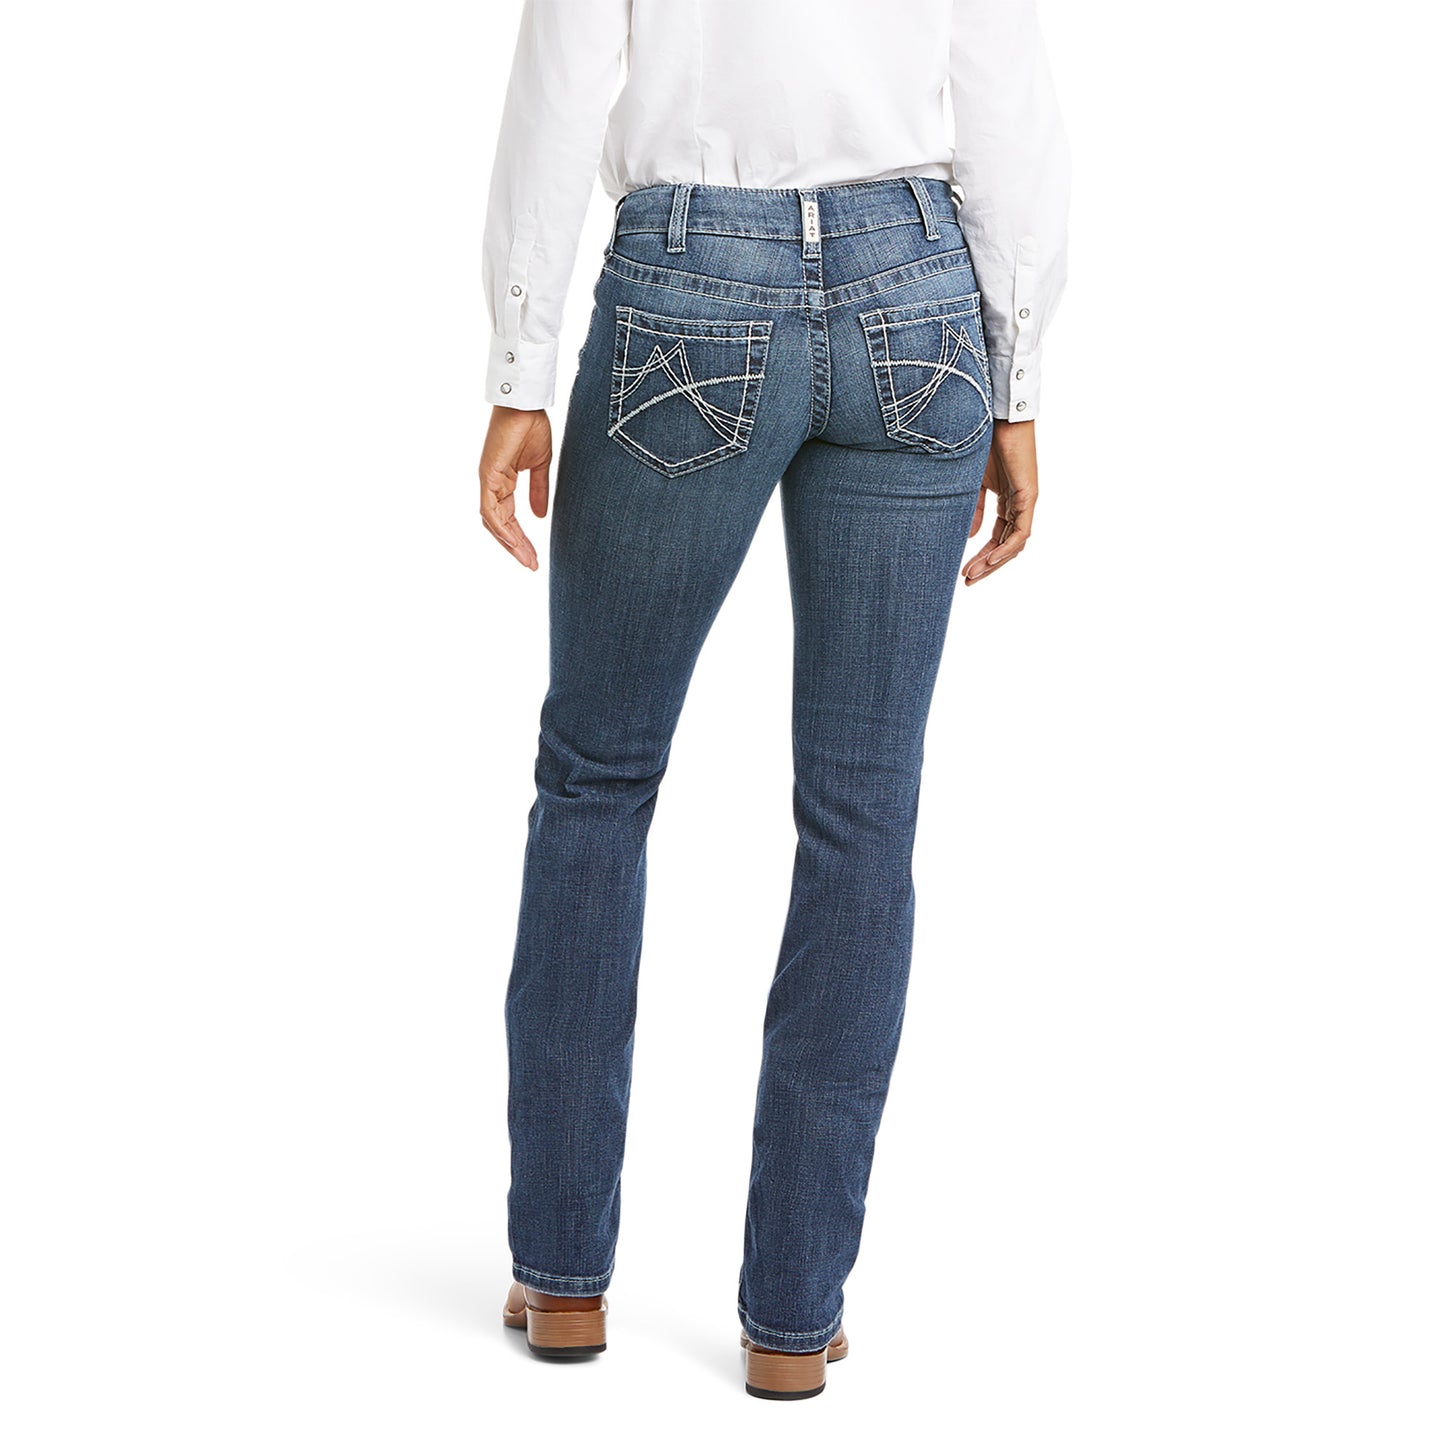 Jeans – Tagged size-29-long – Wild West Boot Store